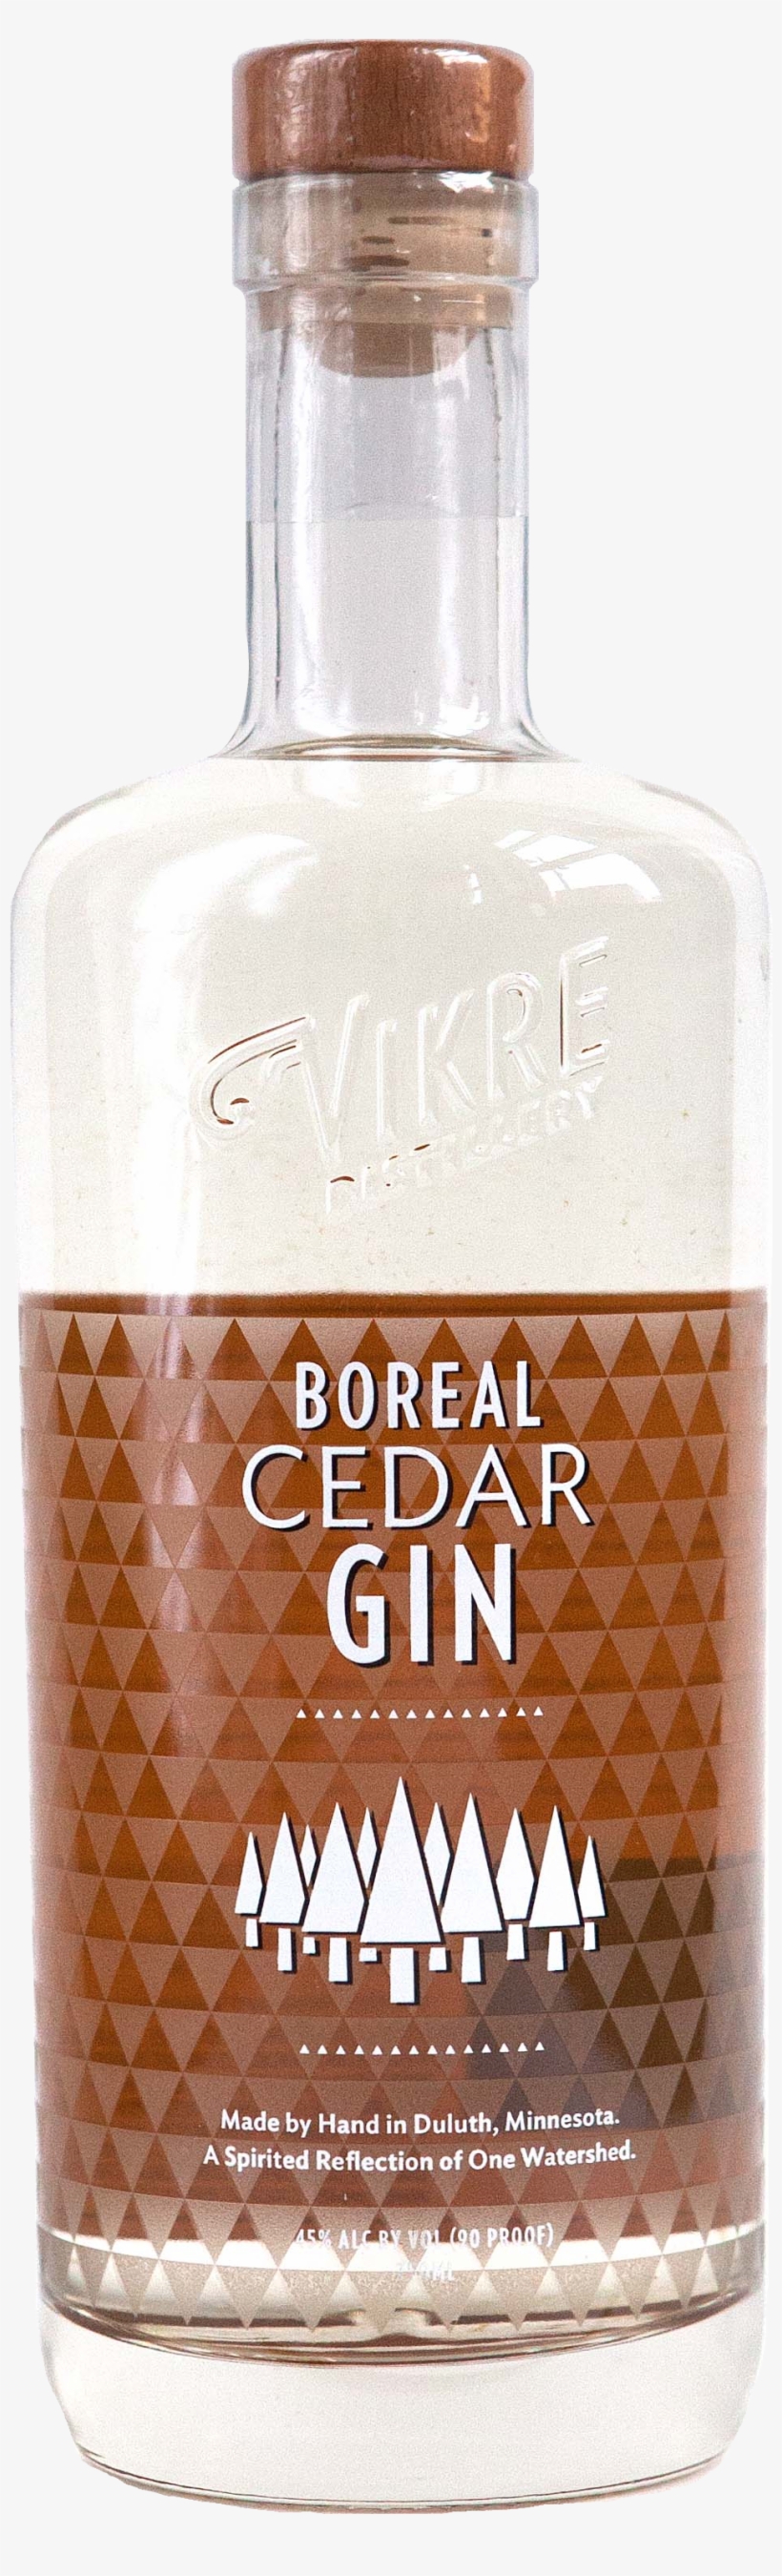 Photos Of Vikre Distillery Products - Vikre Distillery, transparent png #2471008